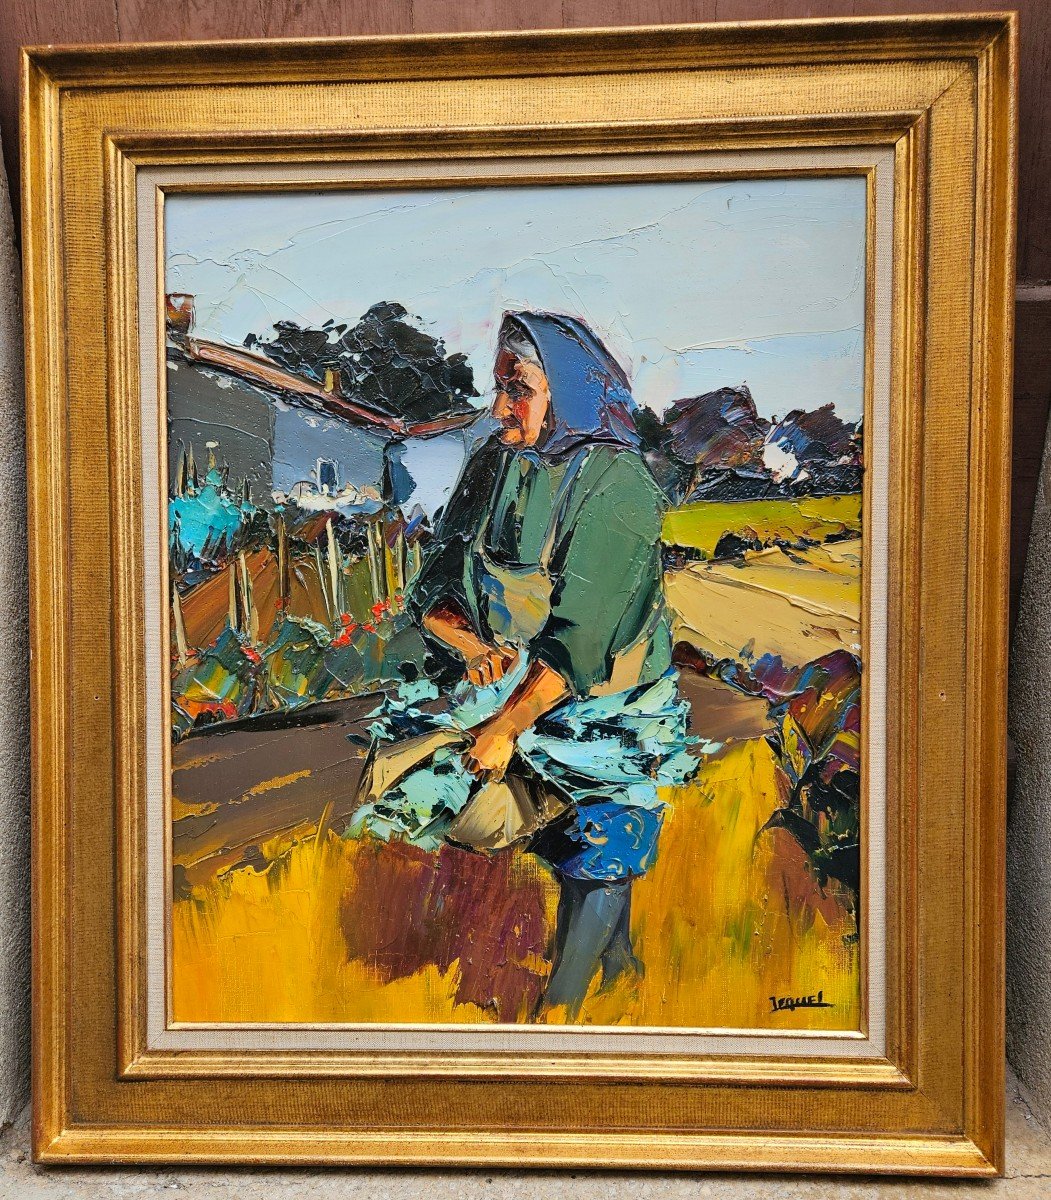 Provençal Peasant Woman At Work By Christian Jequel